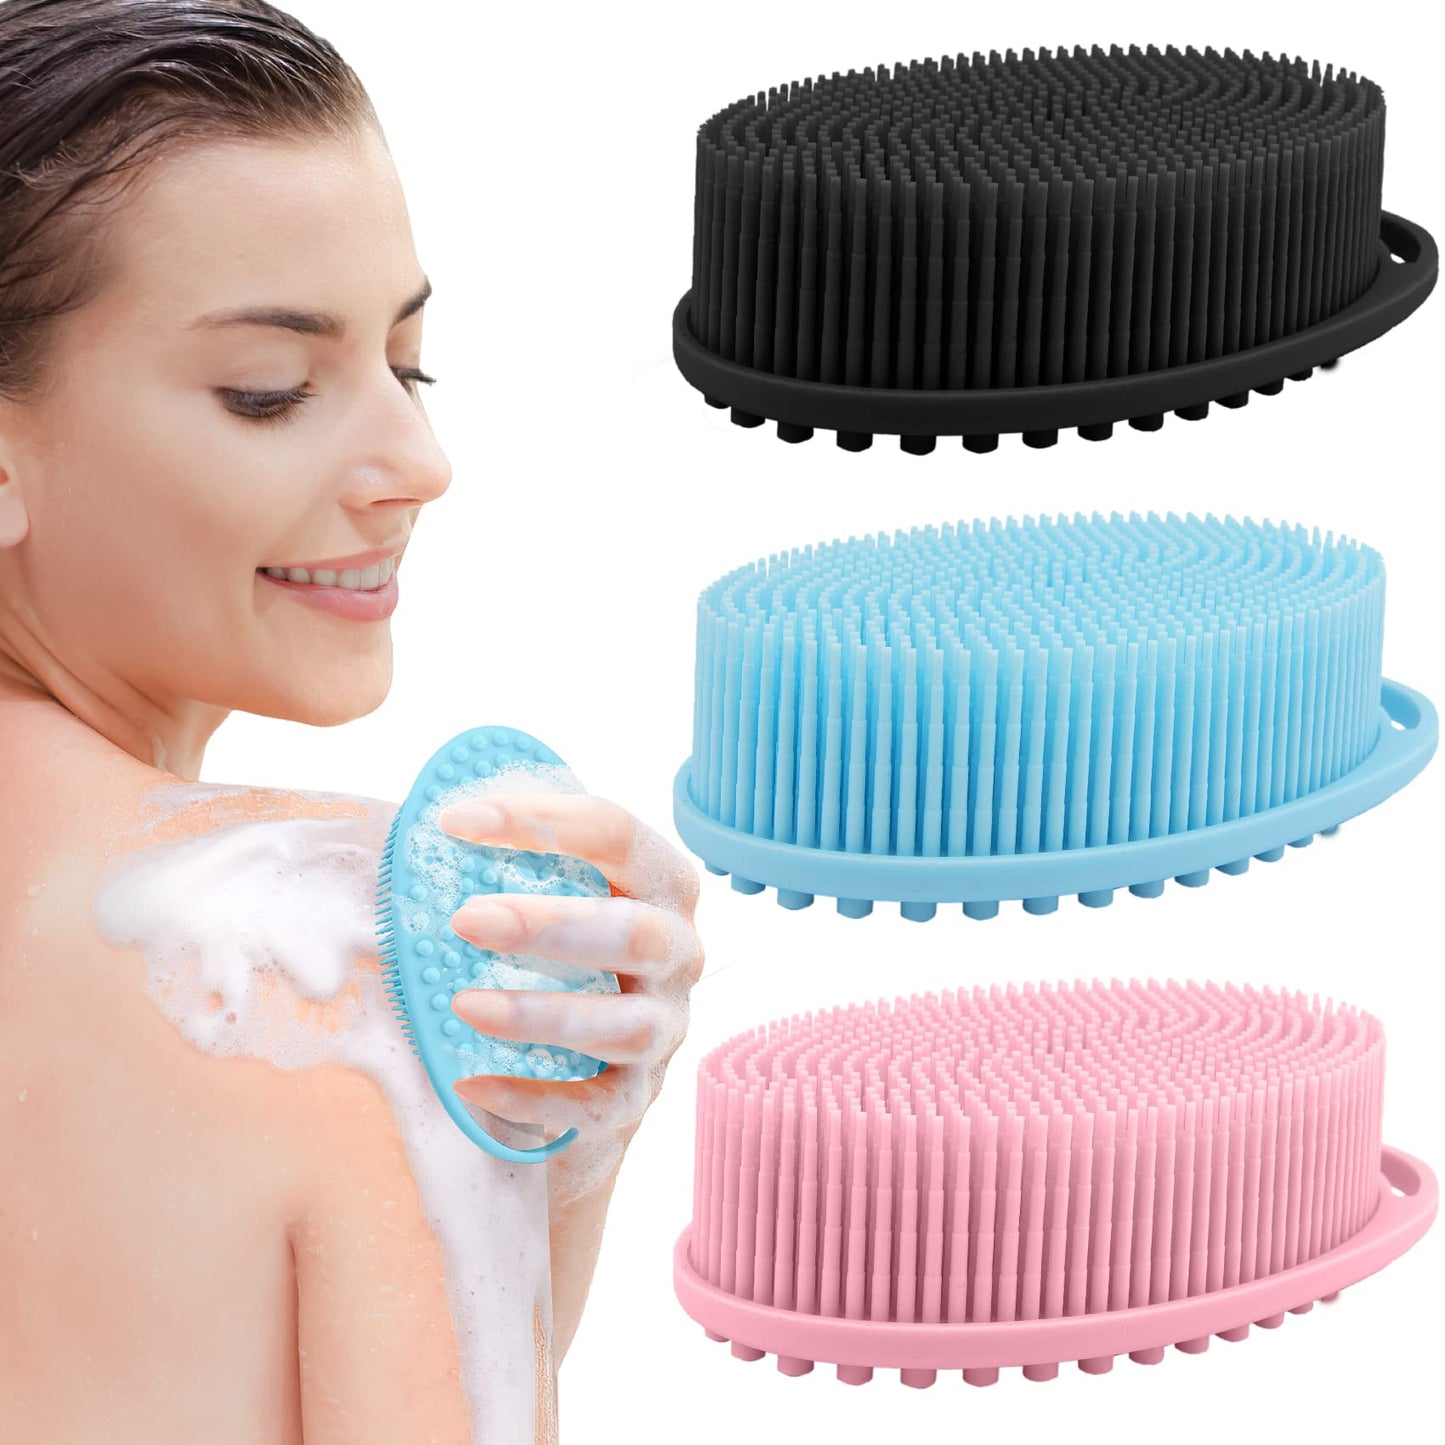 3 Pack Silicone Body Scrubber, Exfoliating Body Scrubber Soft Silicone Loofah Body Scrubber Fit for Sensitive and All Kinds of Skin Clean and Sanitary